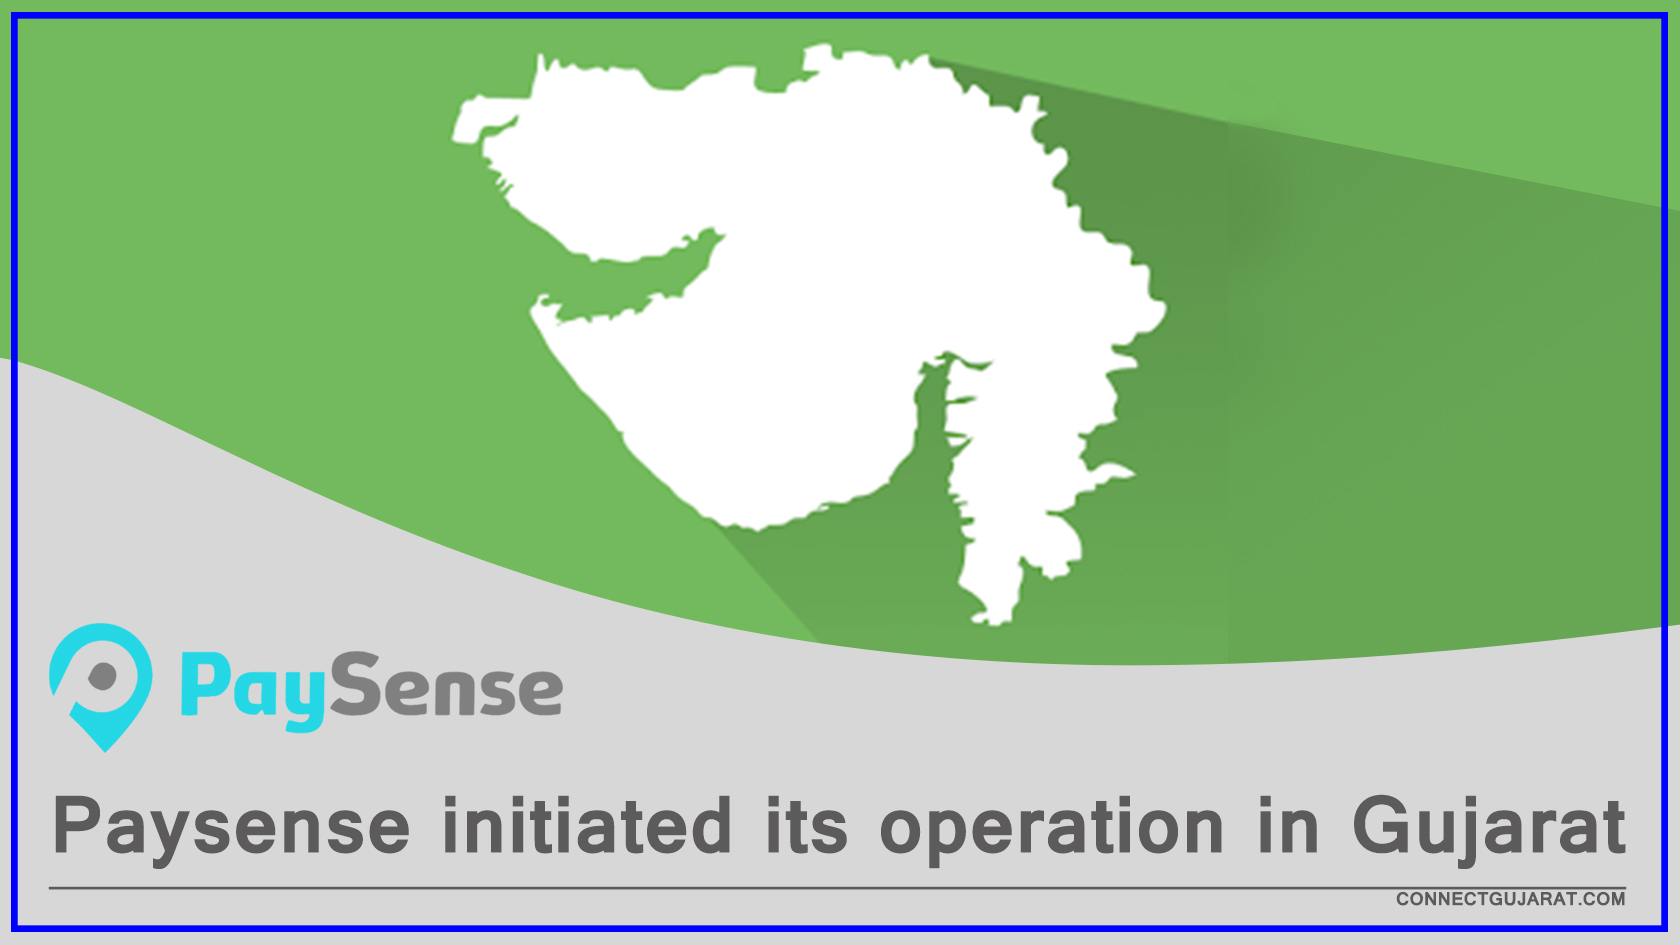 Paysense initiated its operation in Gujarat